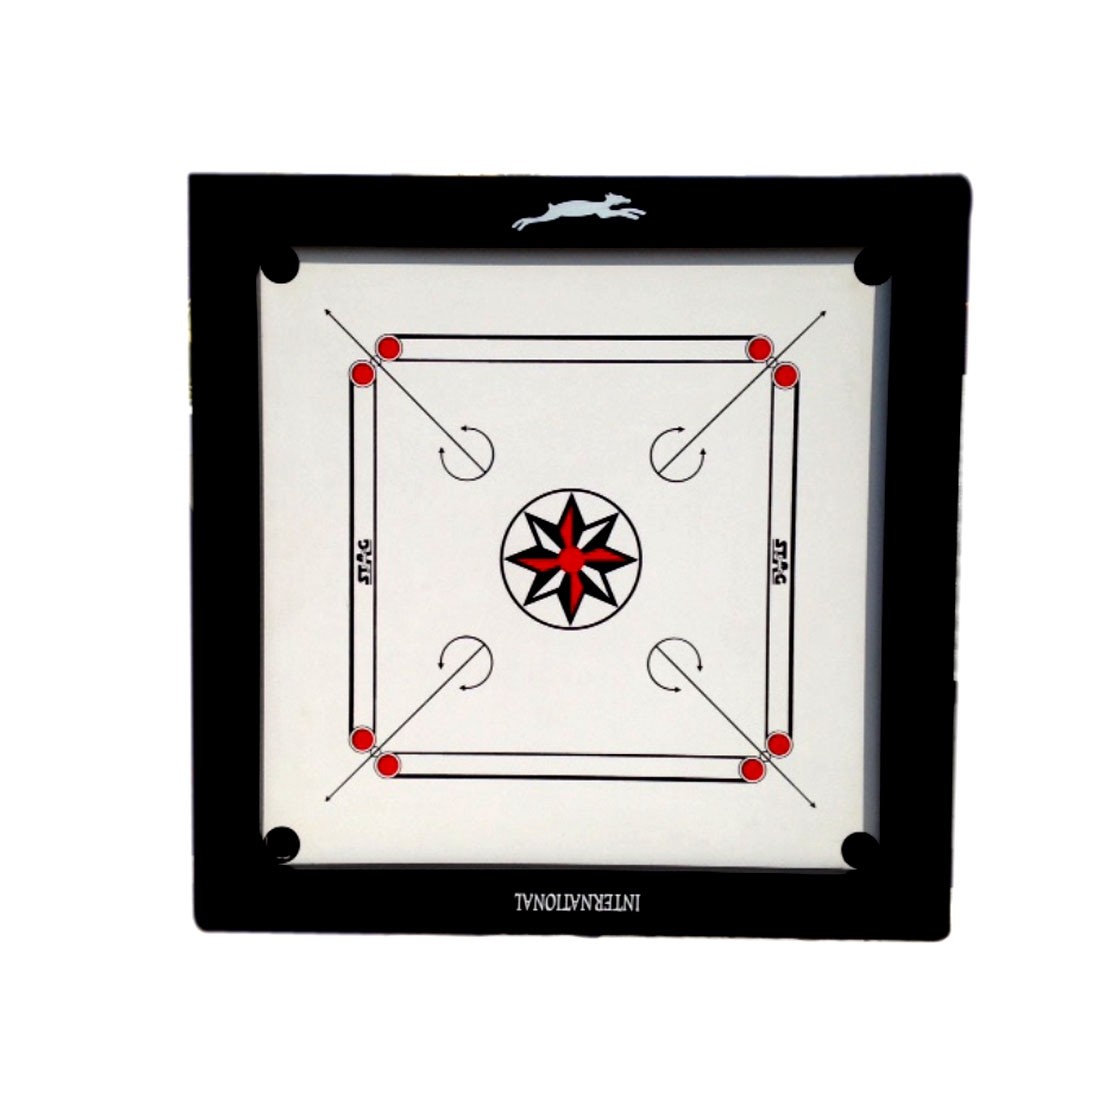 STAG CARROM BOARD INT. 2.5" BORDER 12MM Prelaminated Particle Board WITH WHEELS